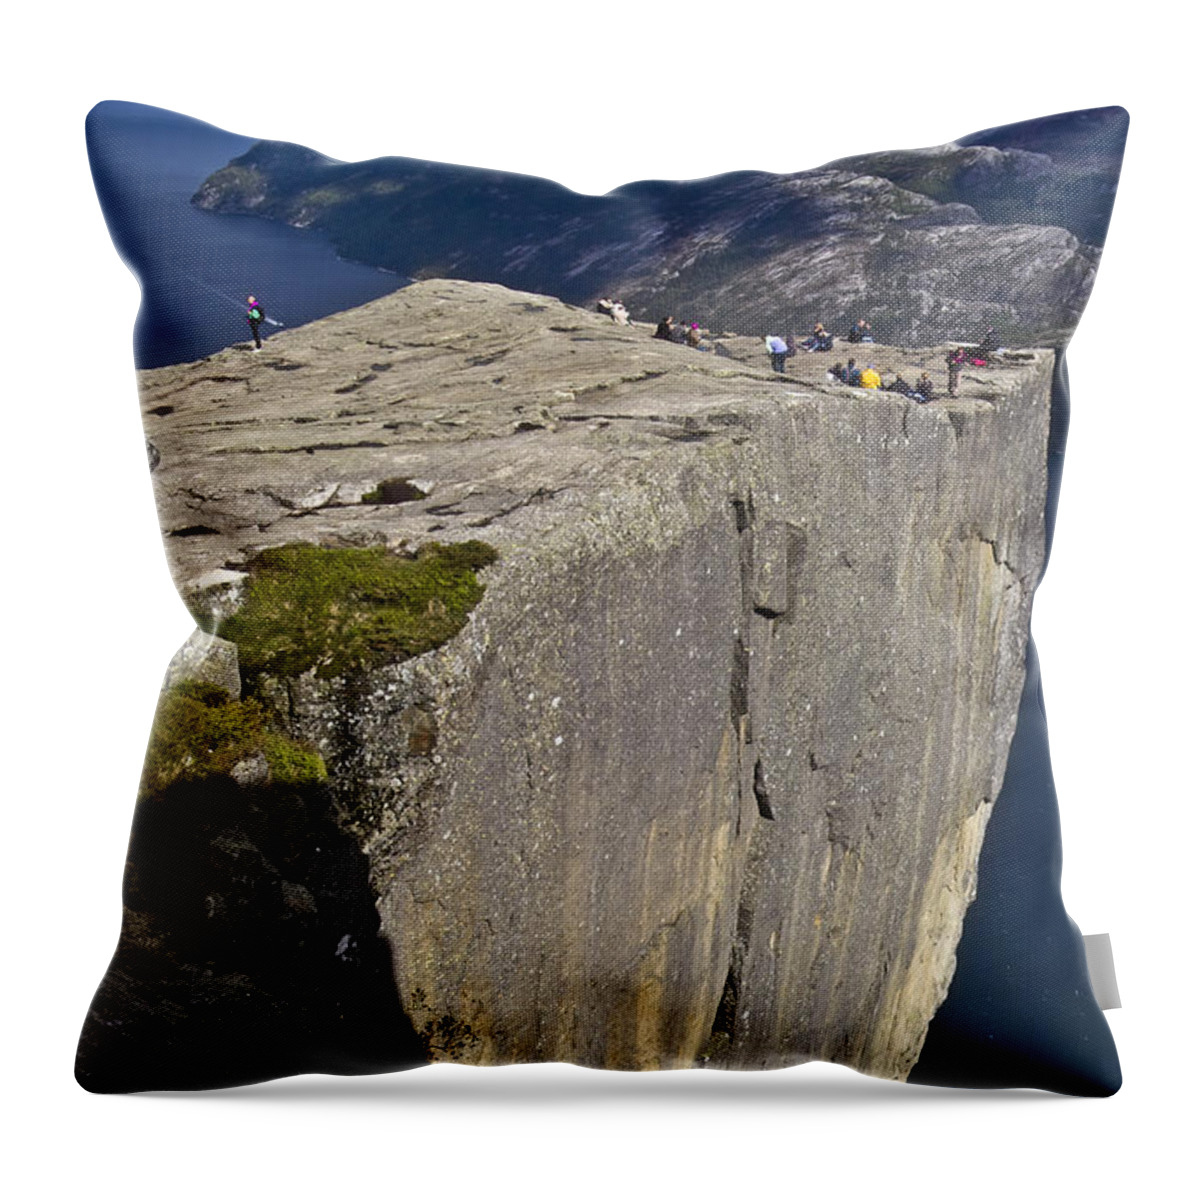 Europe Throw Pillow featuring the photograph Pulpit Rock by Heiko Koehrer-Wagner